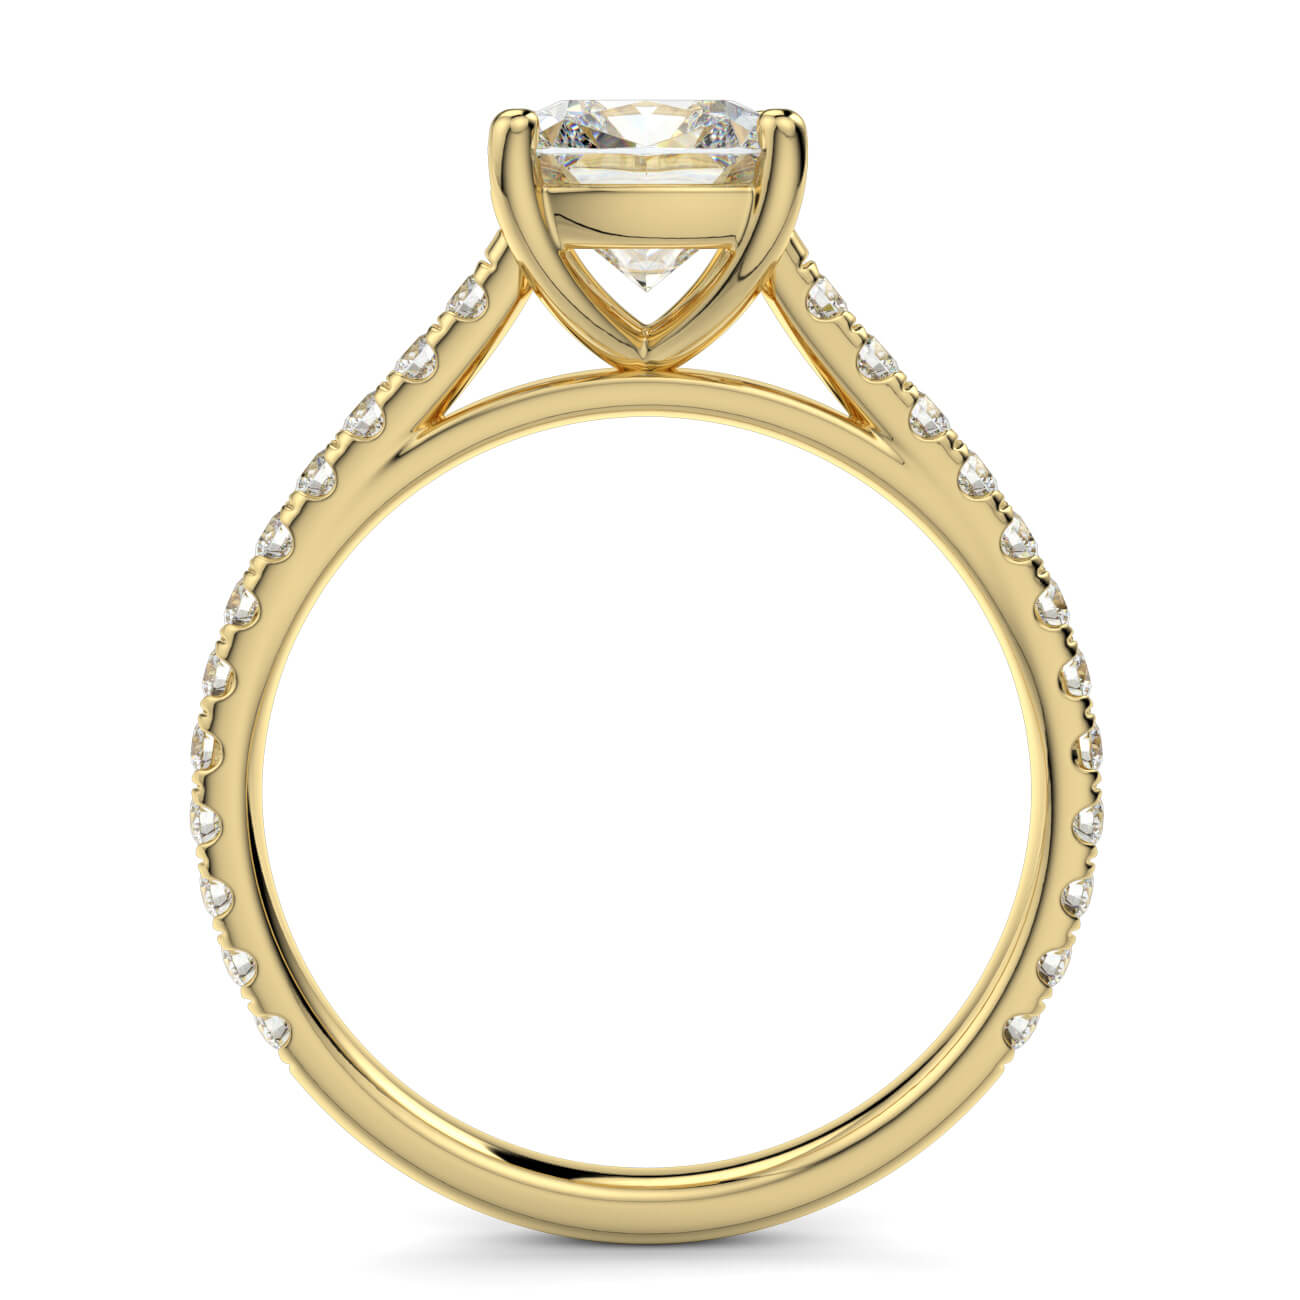 Cushion Cut diamond cathedral engagement ring in yellow gold – Australian Diamond Network